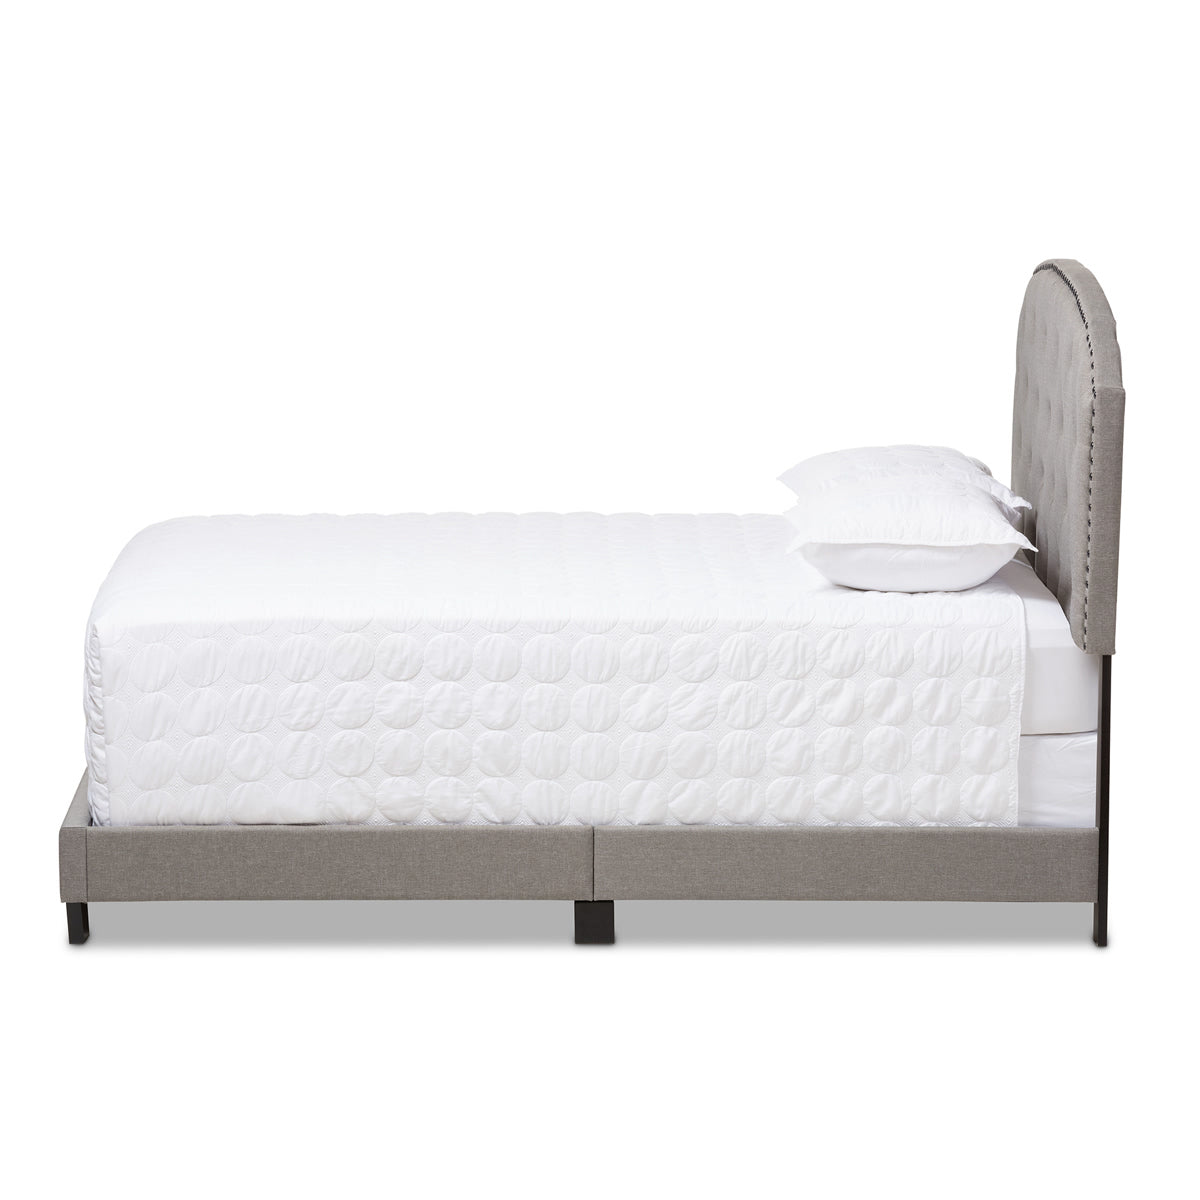 Baxton Studio Lexi Modern and Contemporary Light Grey Fabric Upholstered Queen Size Bed Baxton Studio-Queen Bed-Minimal And Modern - 3